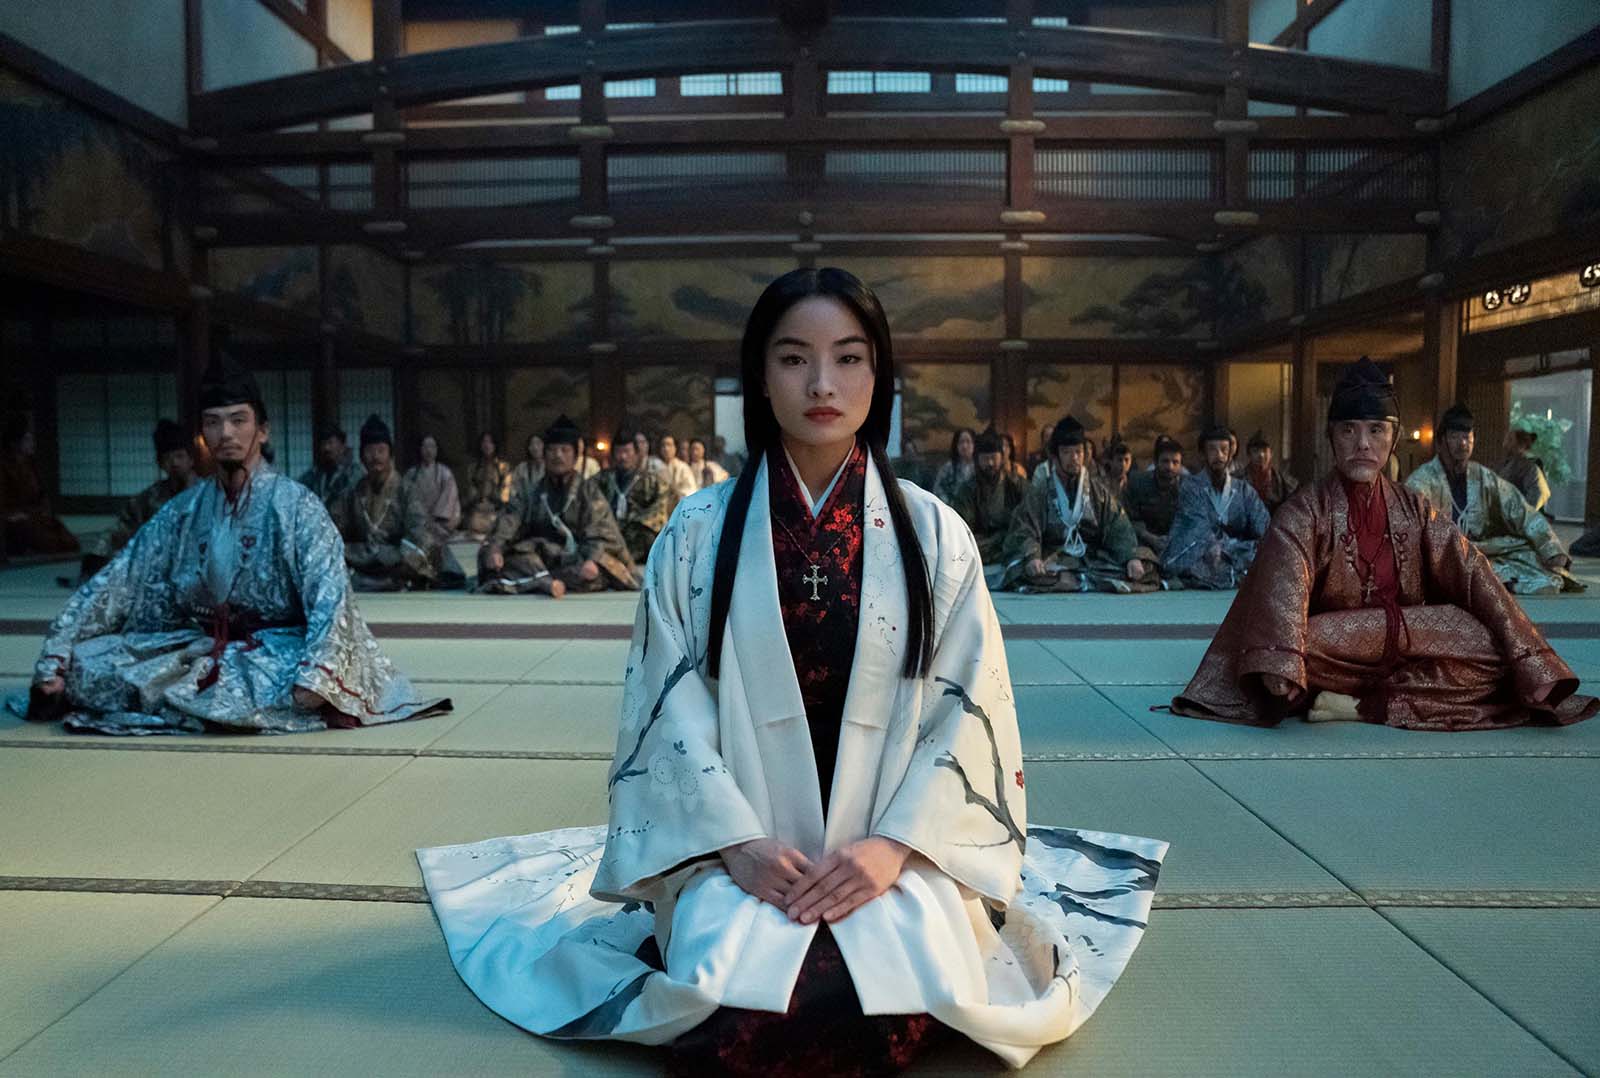 FX's Shogun, based on James Clavell's bestselling novel, takes place in Japan in the year 1600, at the start of a century-defining civil war. Image © FX